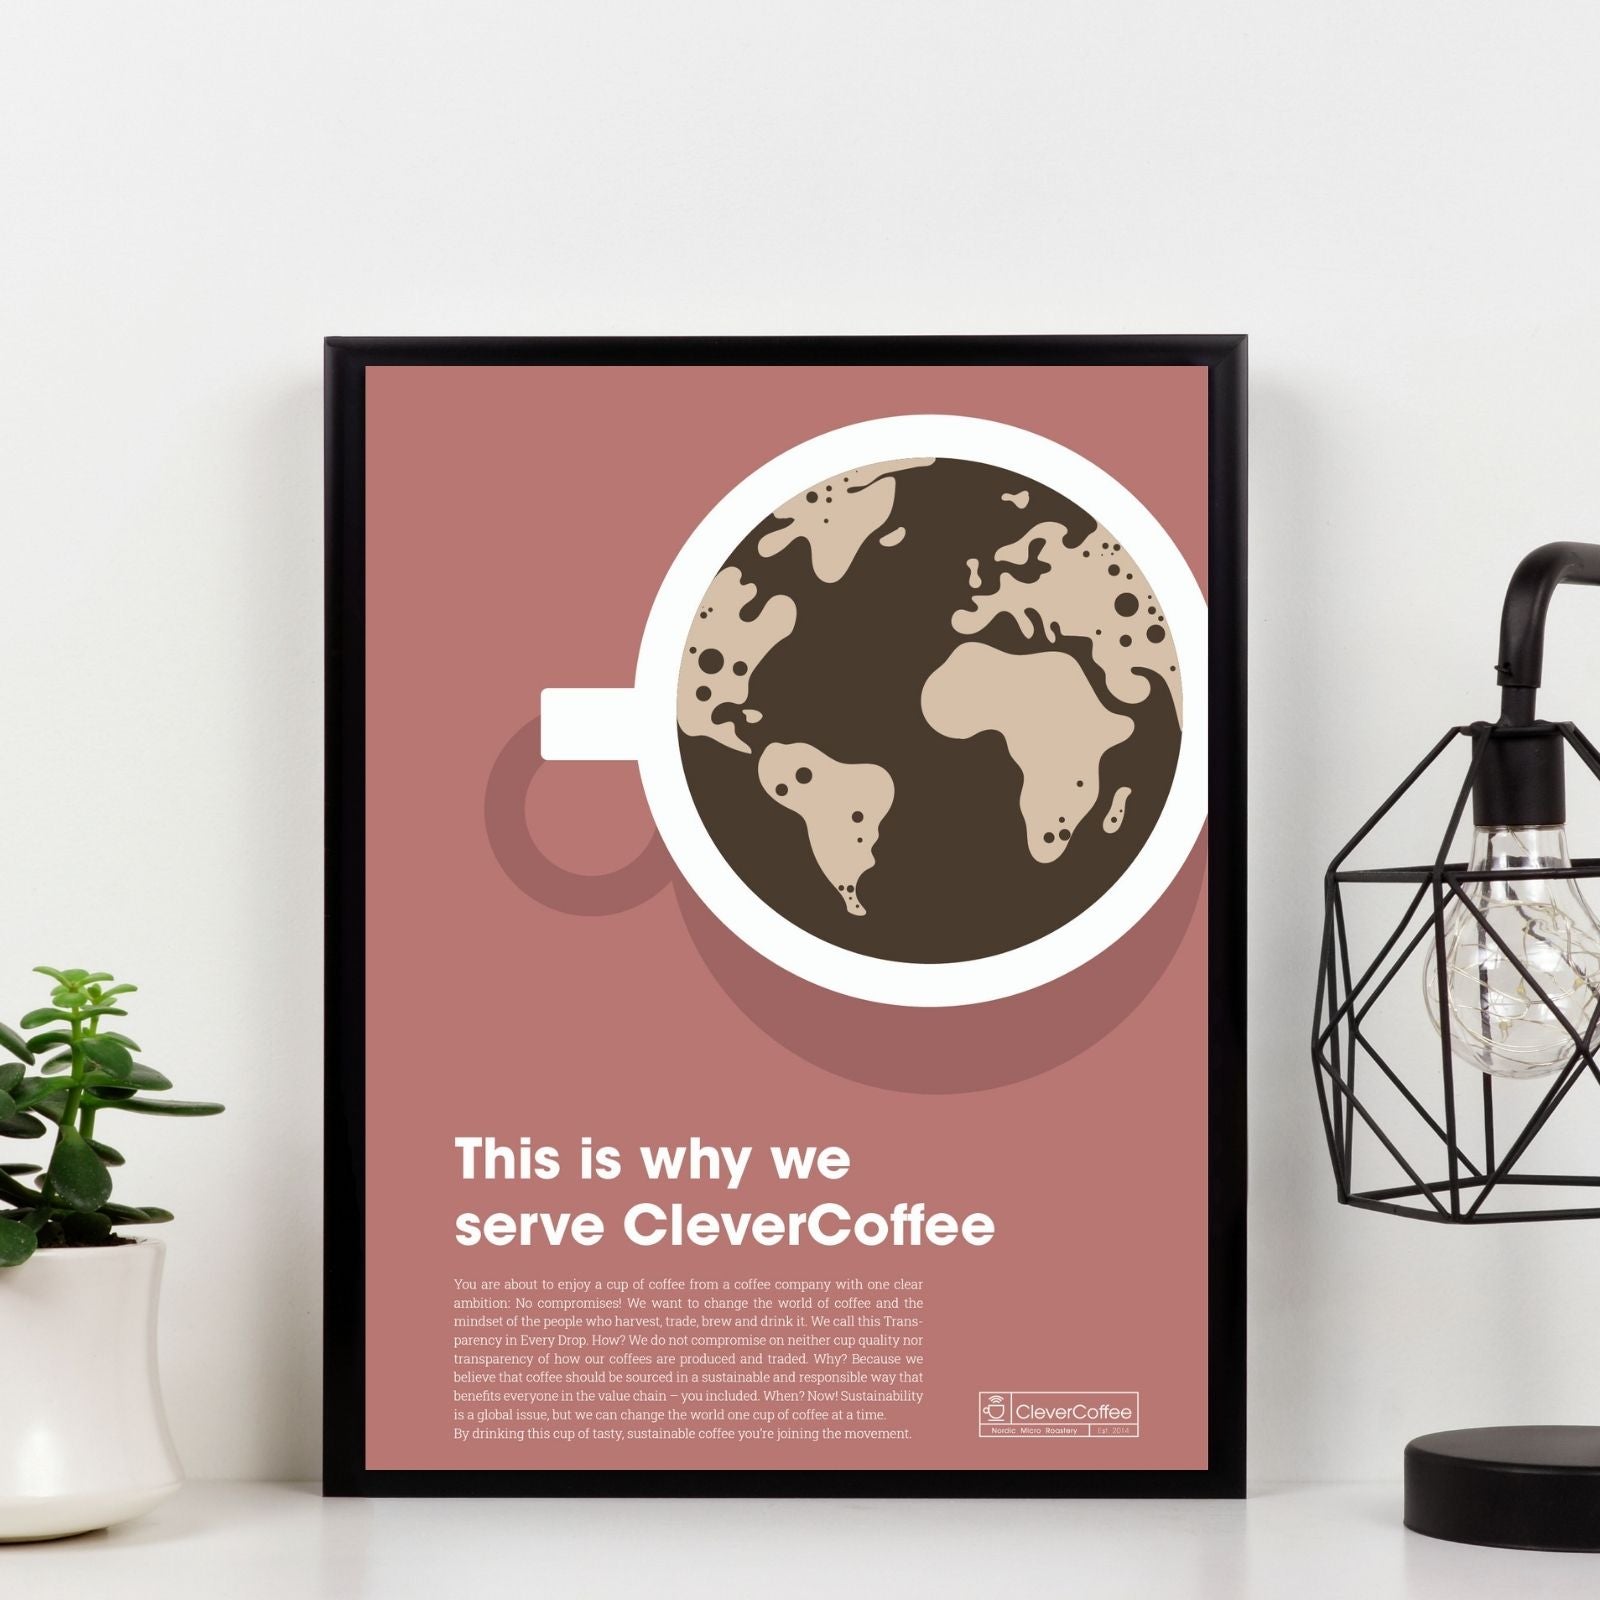 Plakat "This is why we serve CleverCoffee"